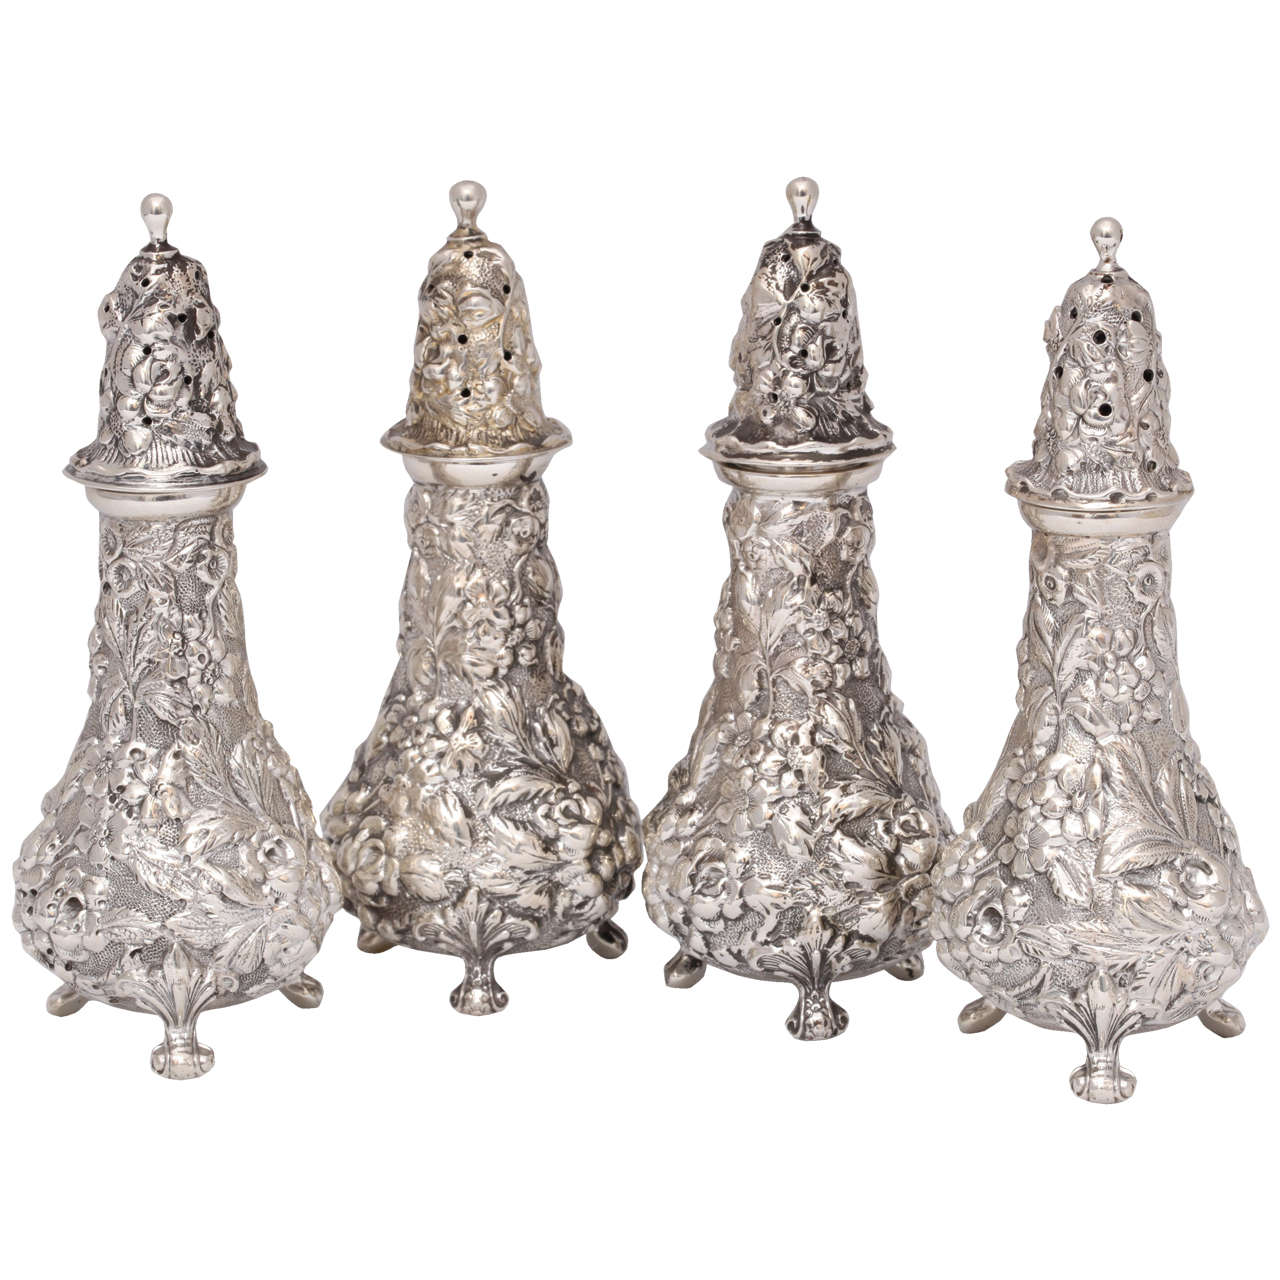 Suite of Four Sterling Silver Footed Salt and Pepper Shakers by Stieff